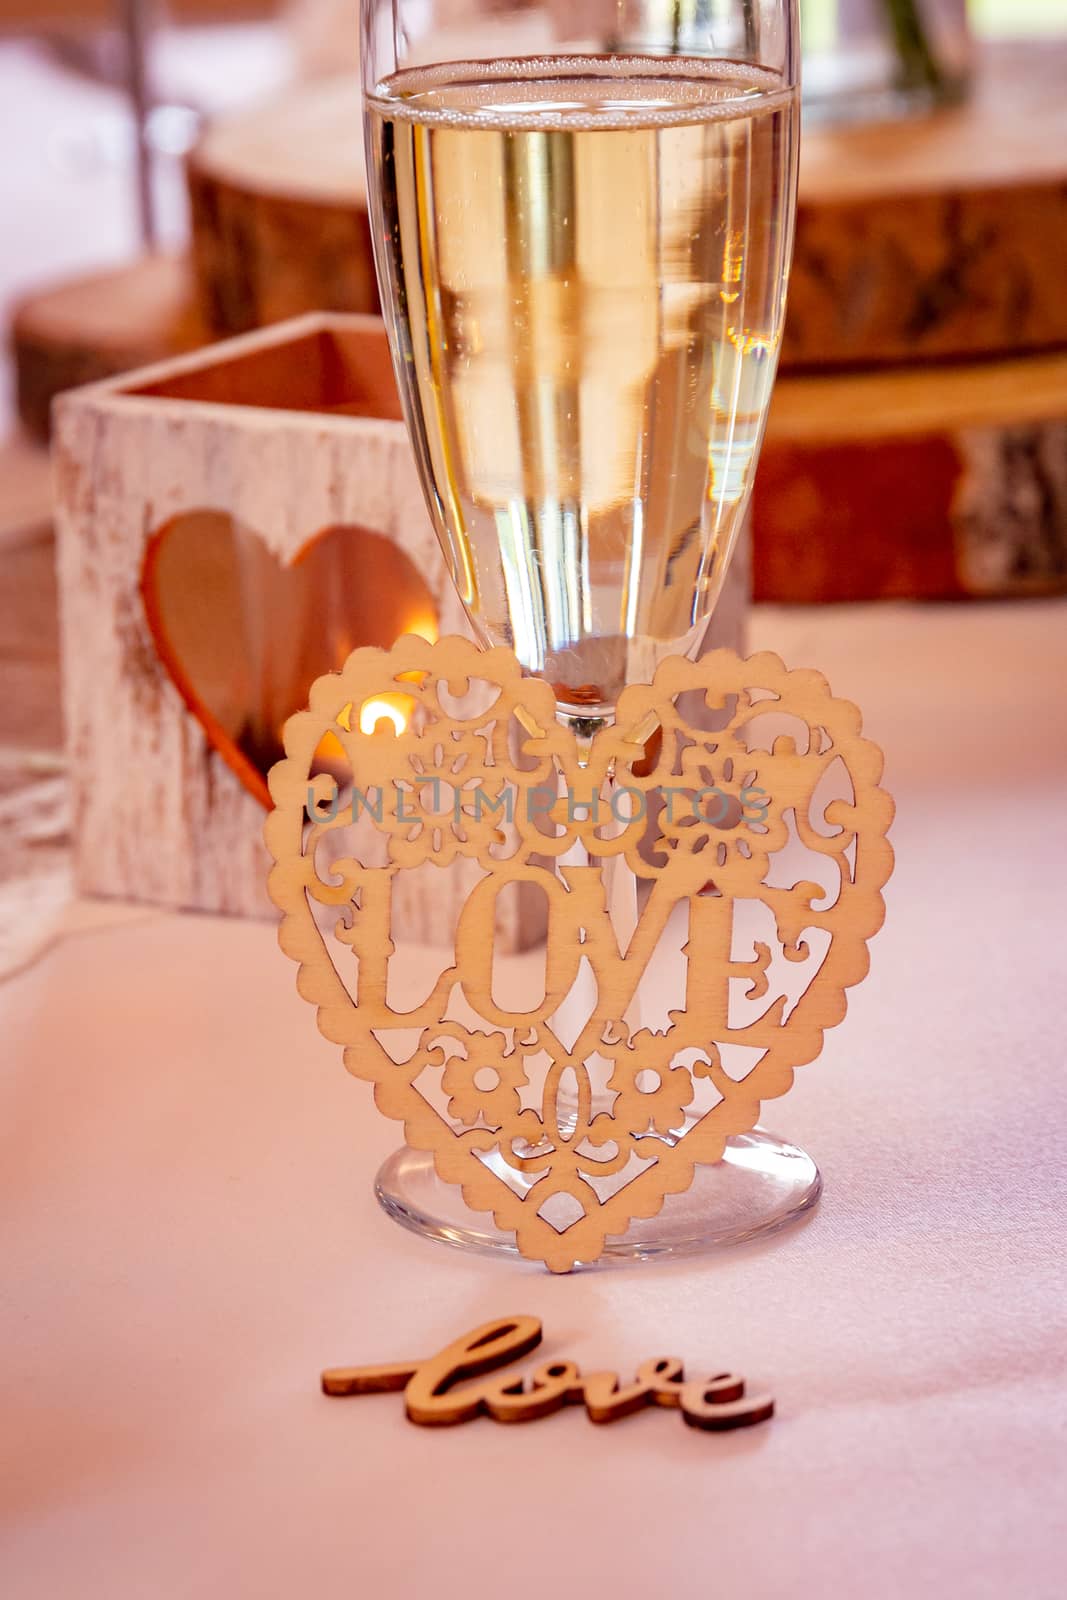 Love concept.  Champagne glass with love text and heart shapes on accessories in a wedding setting